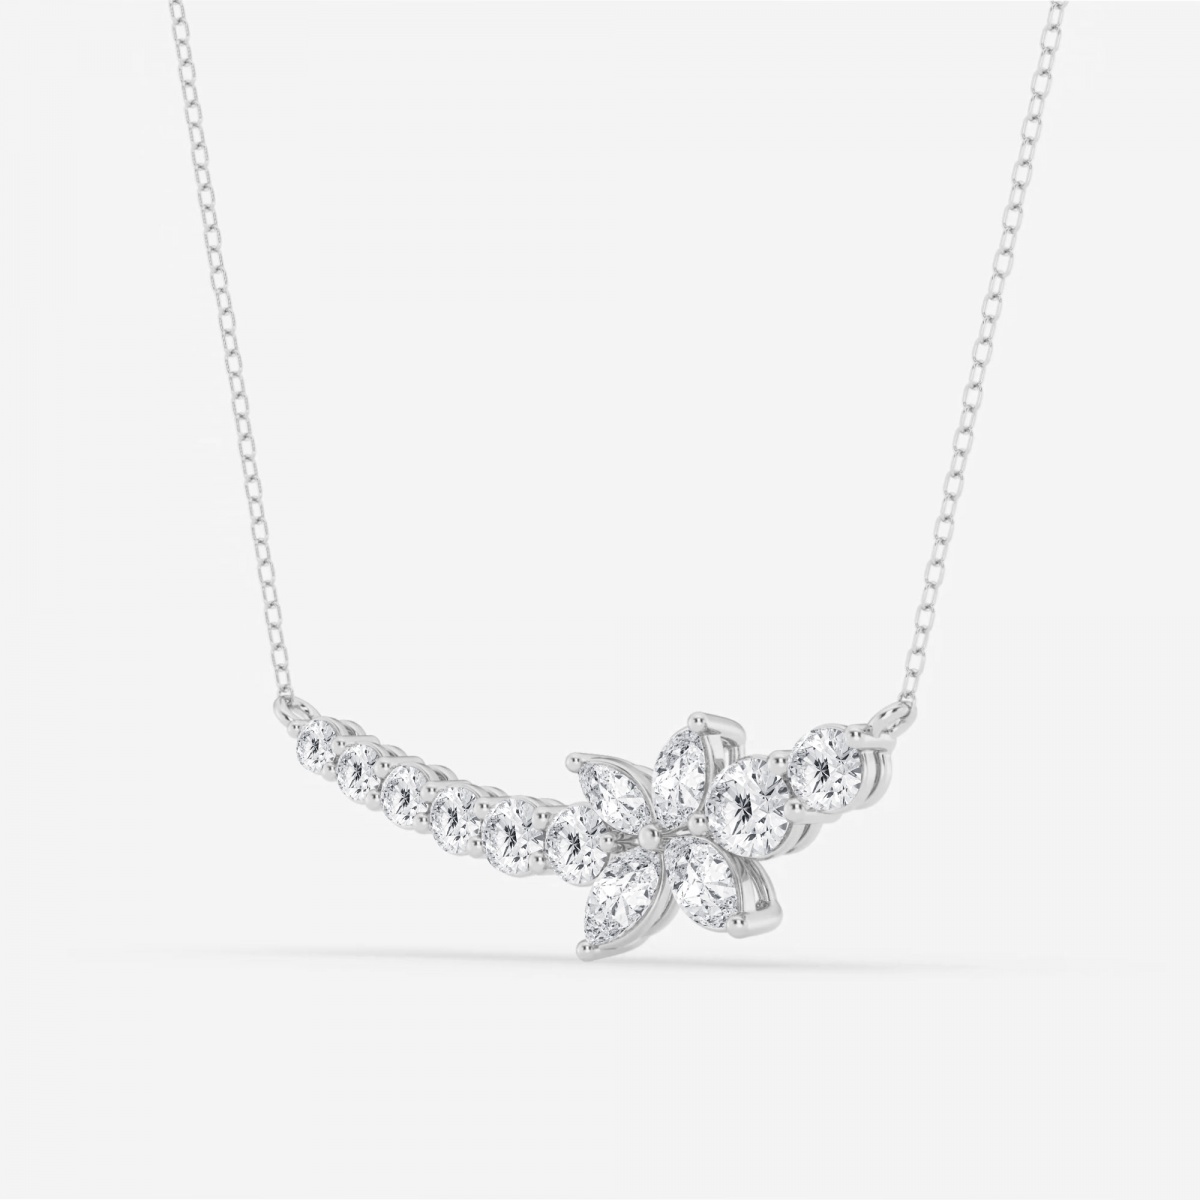 Additional Image 1 for  1 2/3 ctw Marquise Lab Grown Diamond Curved Butterfly Fashion Necklace